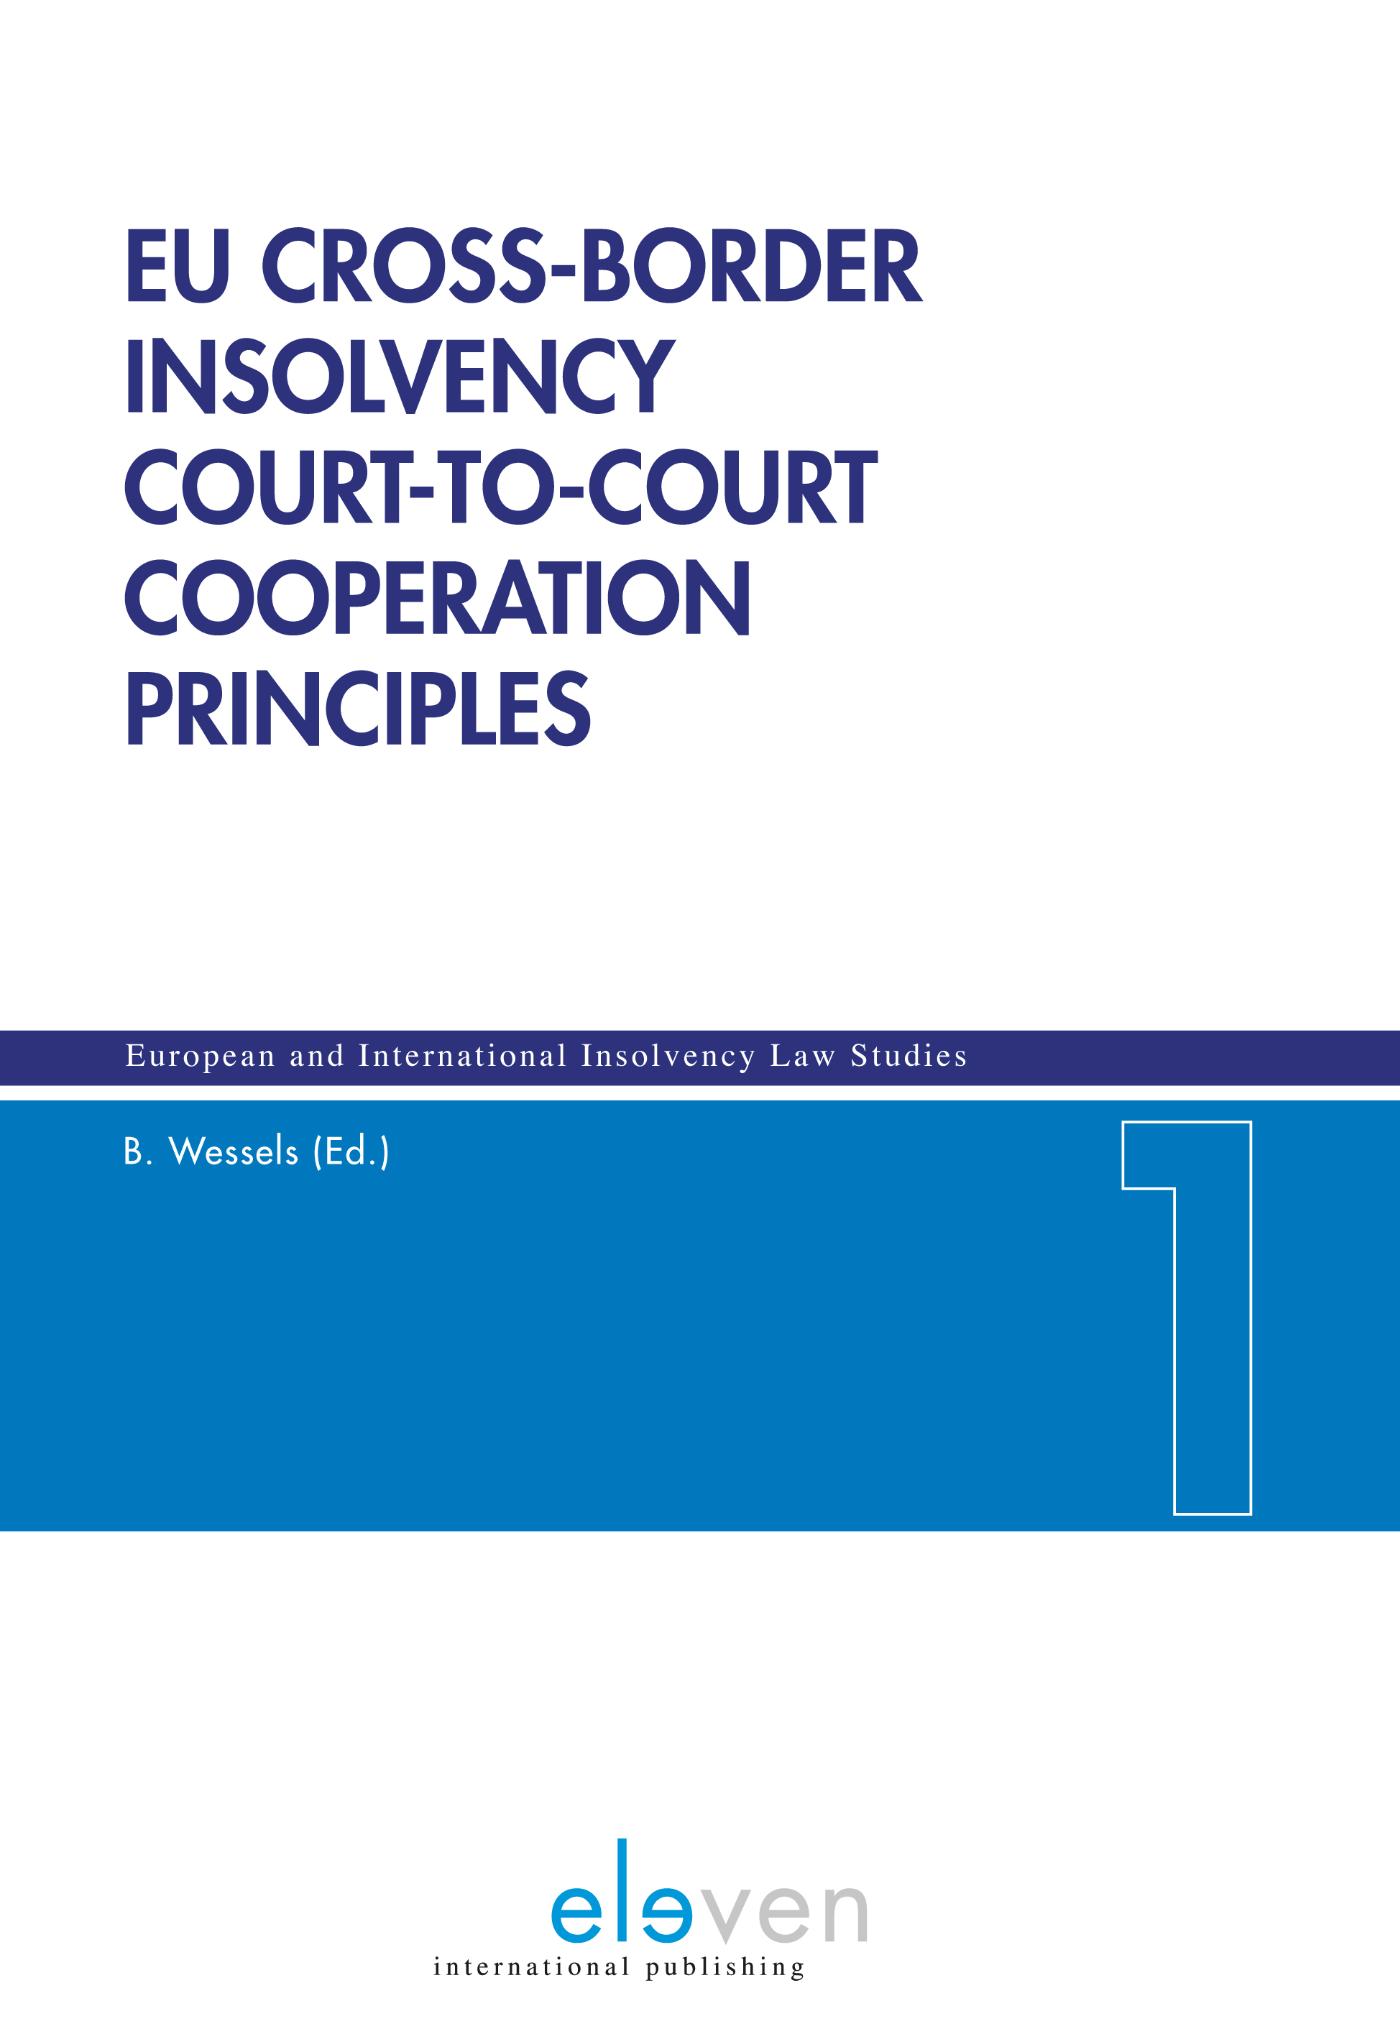 EU Cross-Border insolvency court-to-court cooperation principles (Ebook)